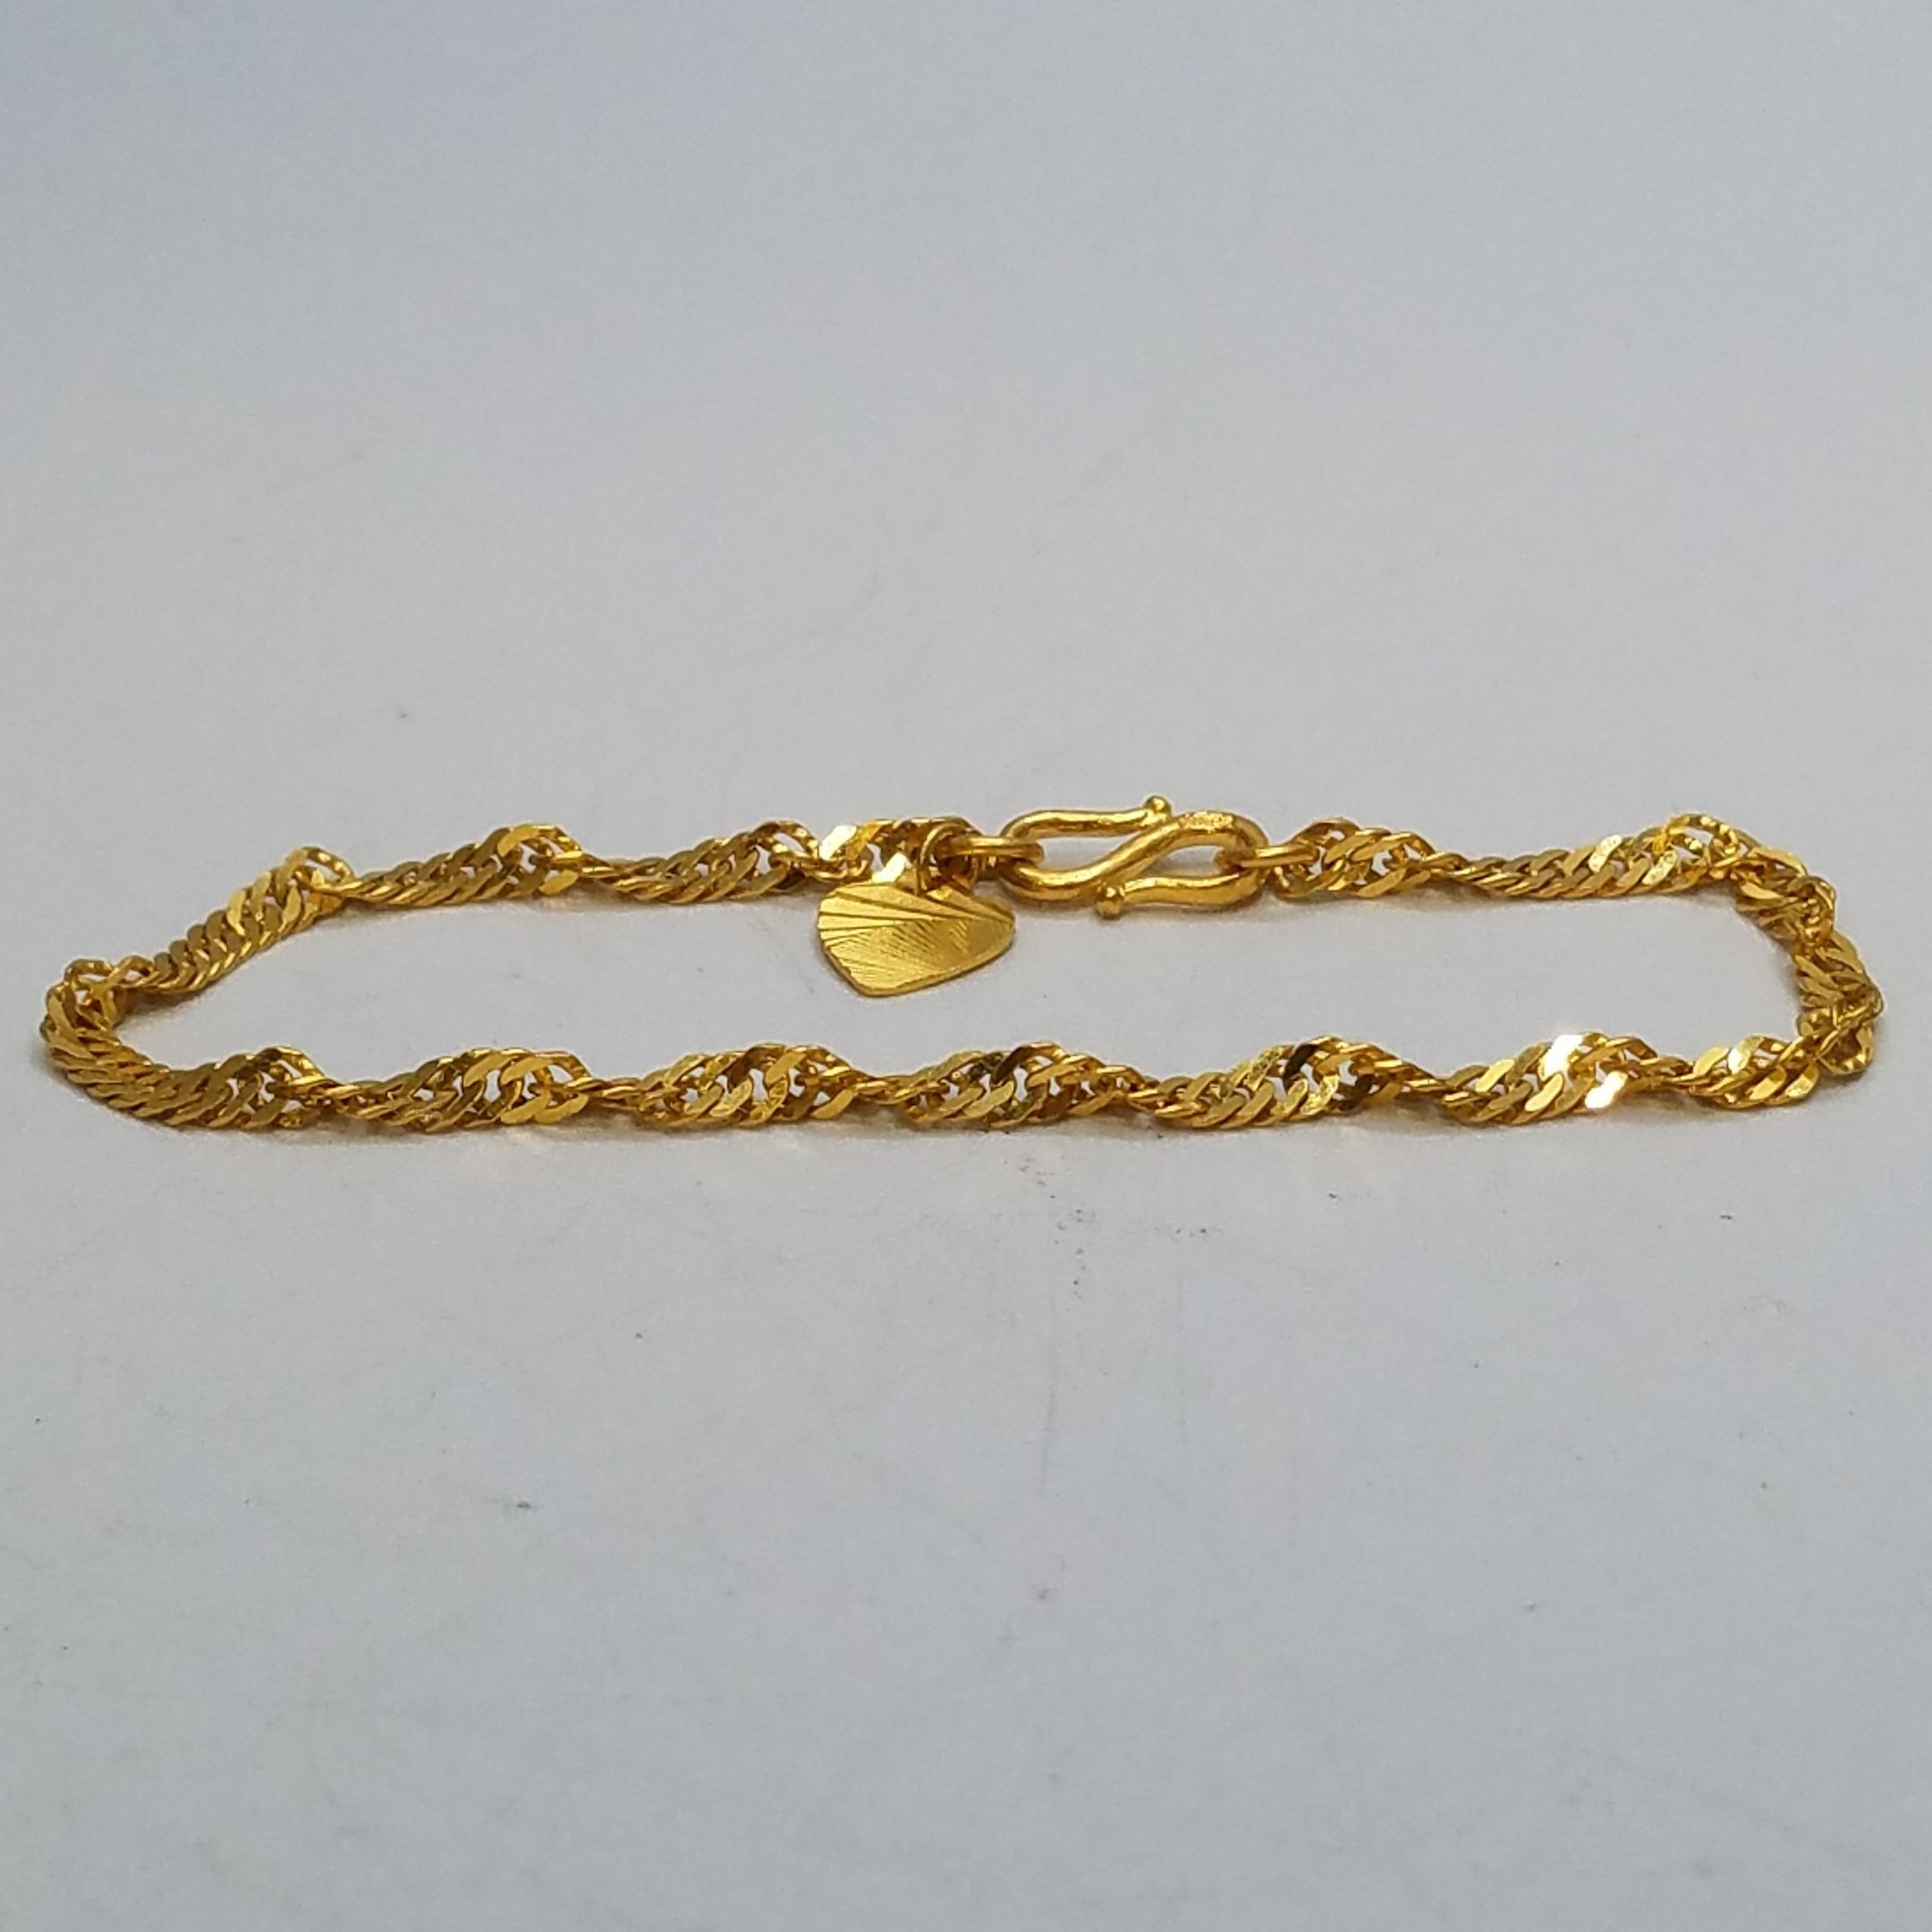 Handcrafted 24K Gold Vermeil 6.5mm Byzantine Bracelet by Arpaia Lang –  Arpaia®